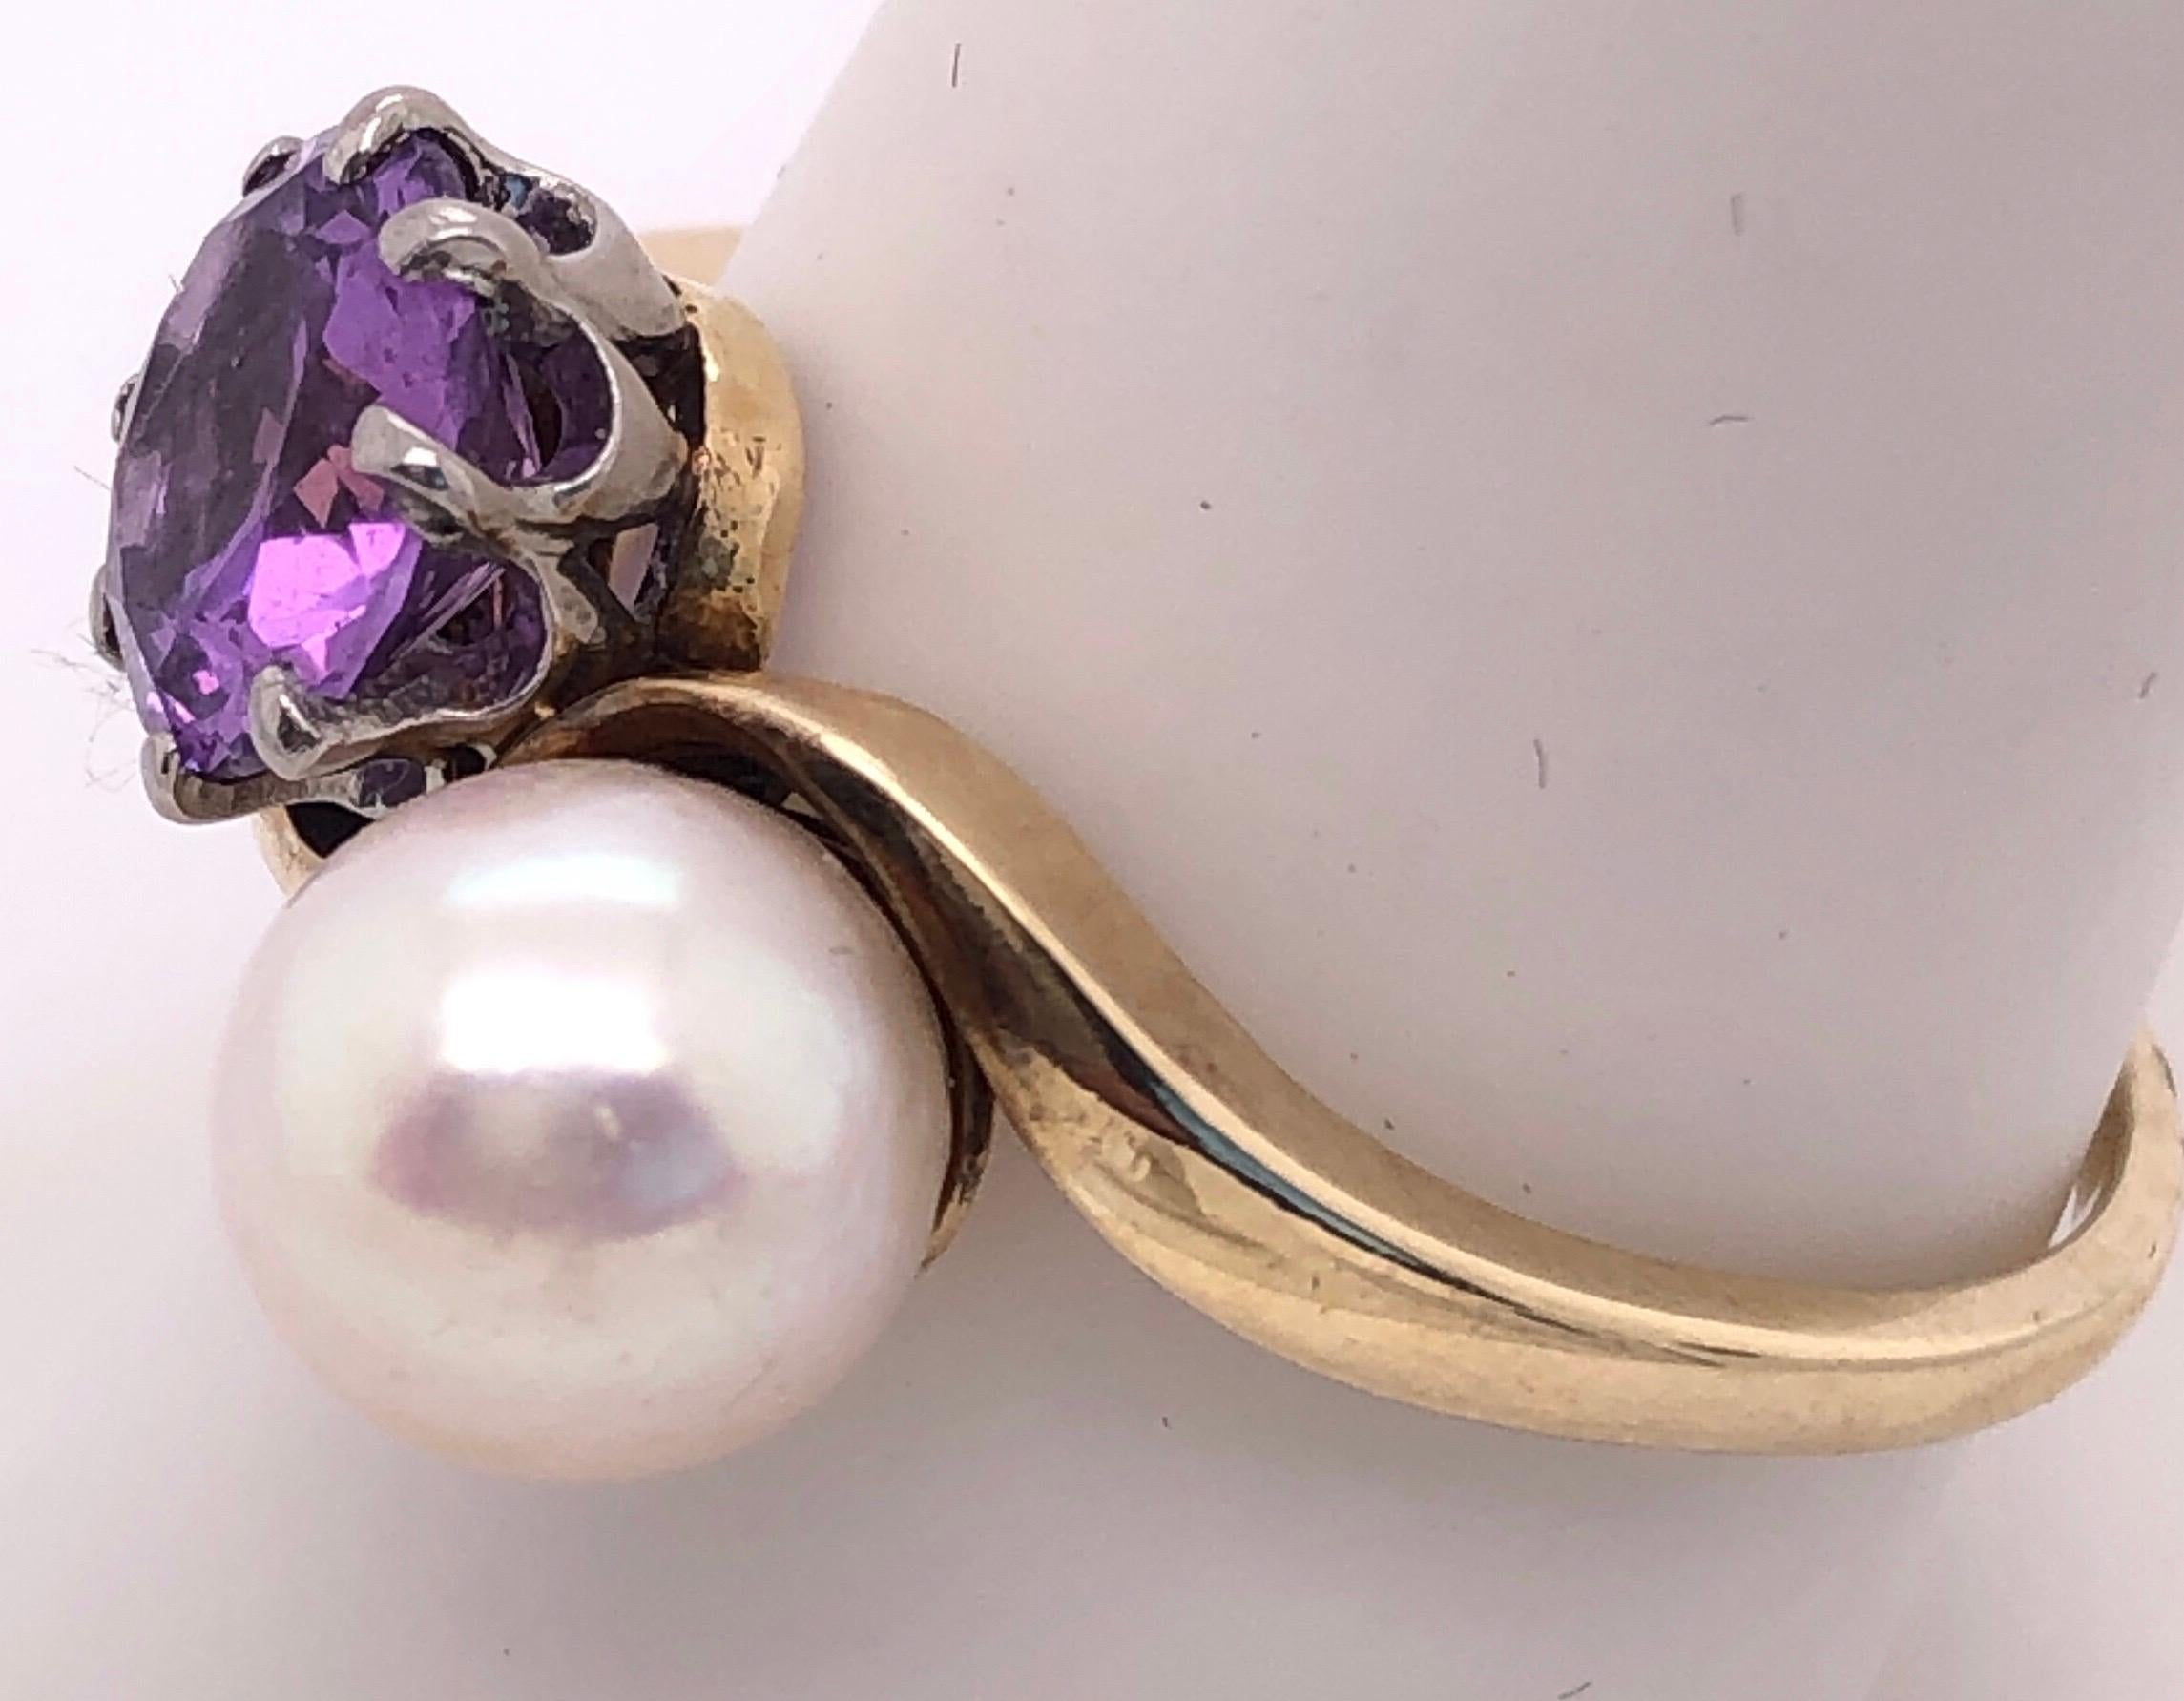 14 Karat Yellow Gold Free Form Ring with Solitaire Amethyst and Pearl  Size 9.5.
Round amethyst and cultured pearl 6.00 mm diameter.
The amethyst is set with white gold prongs.
5 grams total weight.